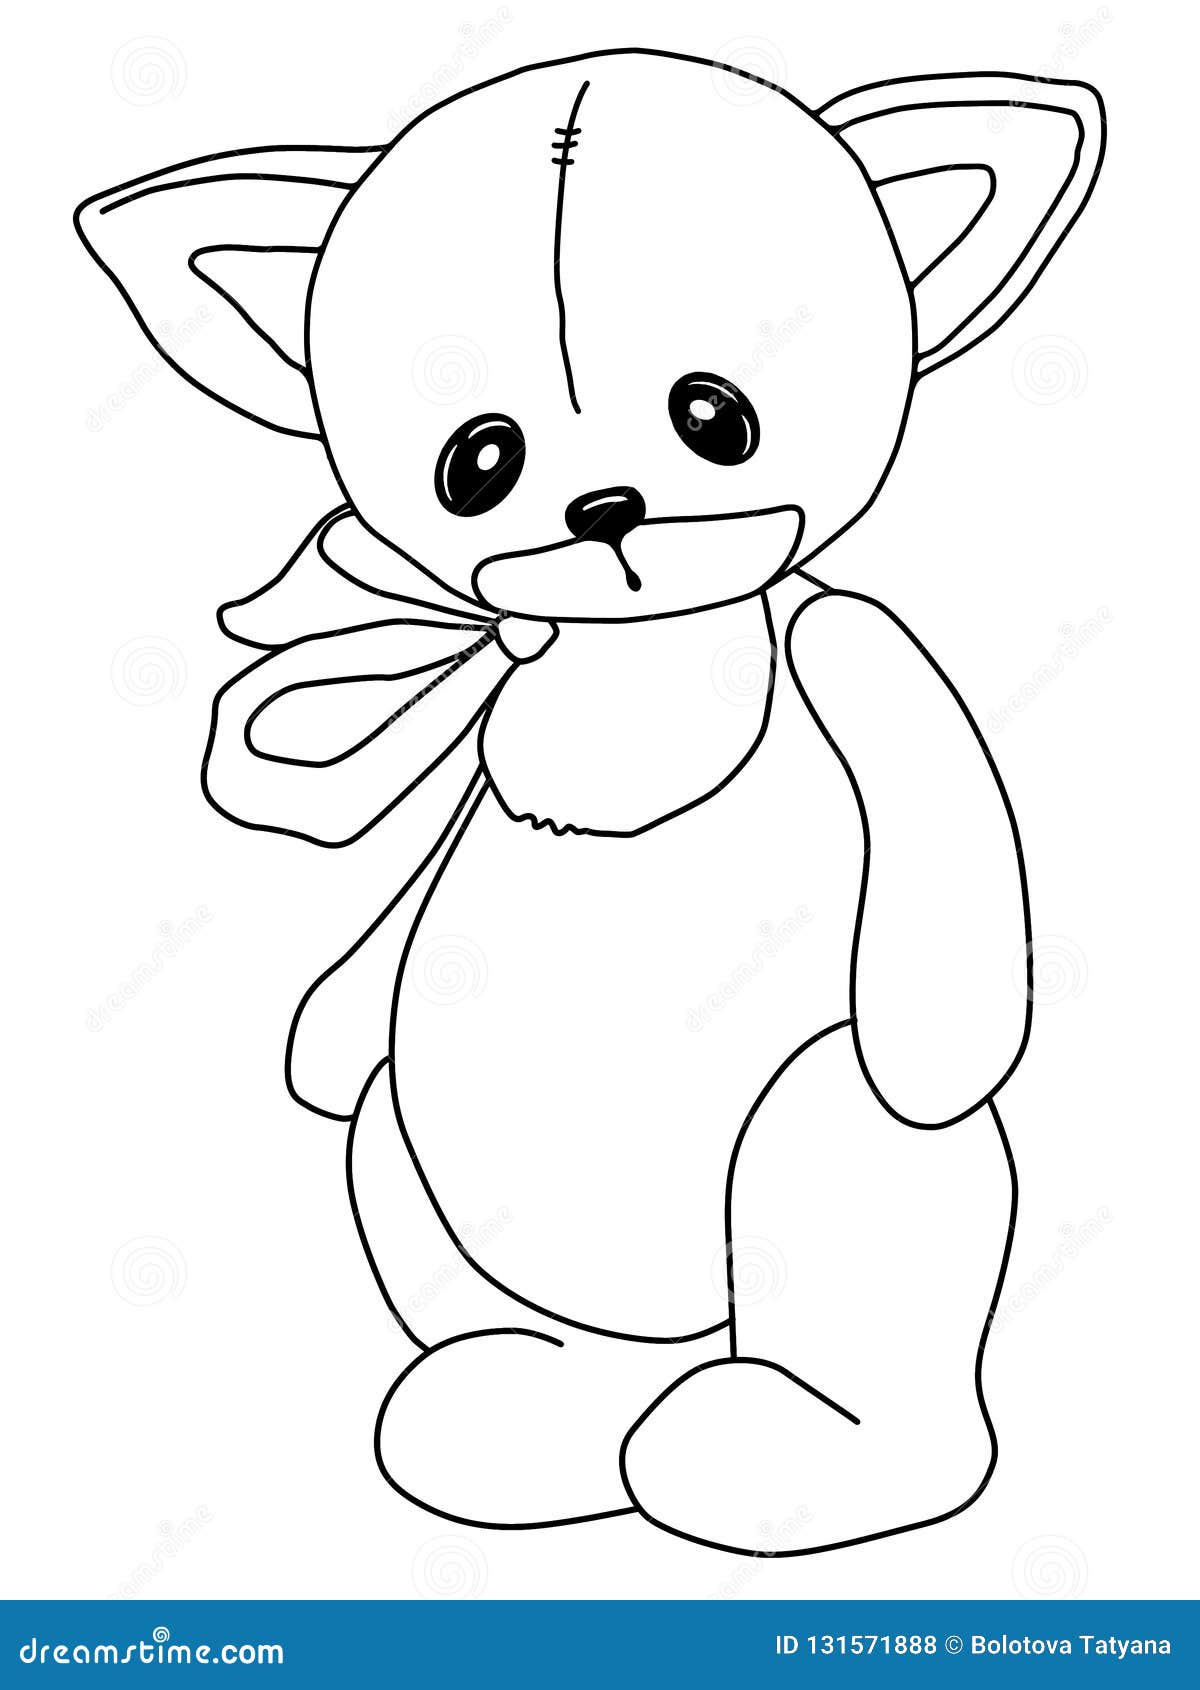 Download Black And White Coloring. Teddy Cat. A Toy. Drawn By Hand ...